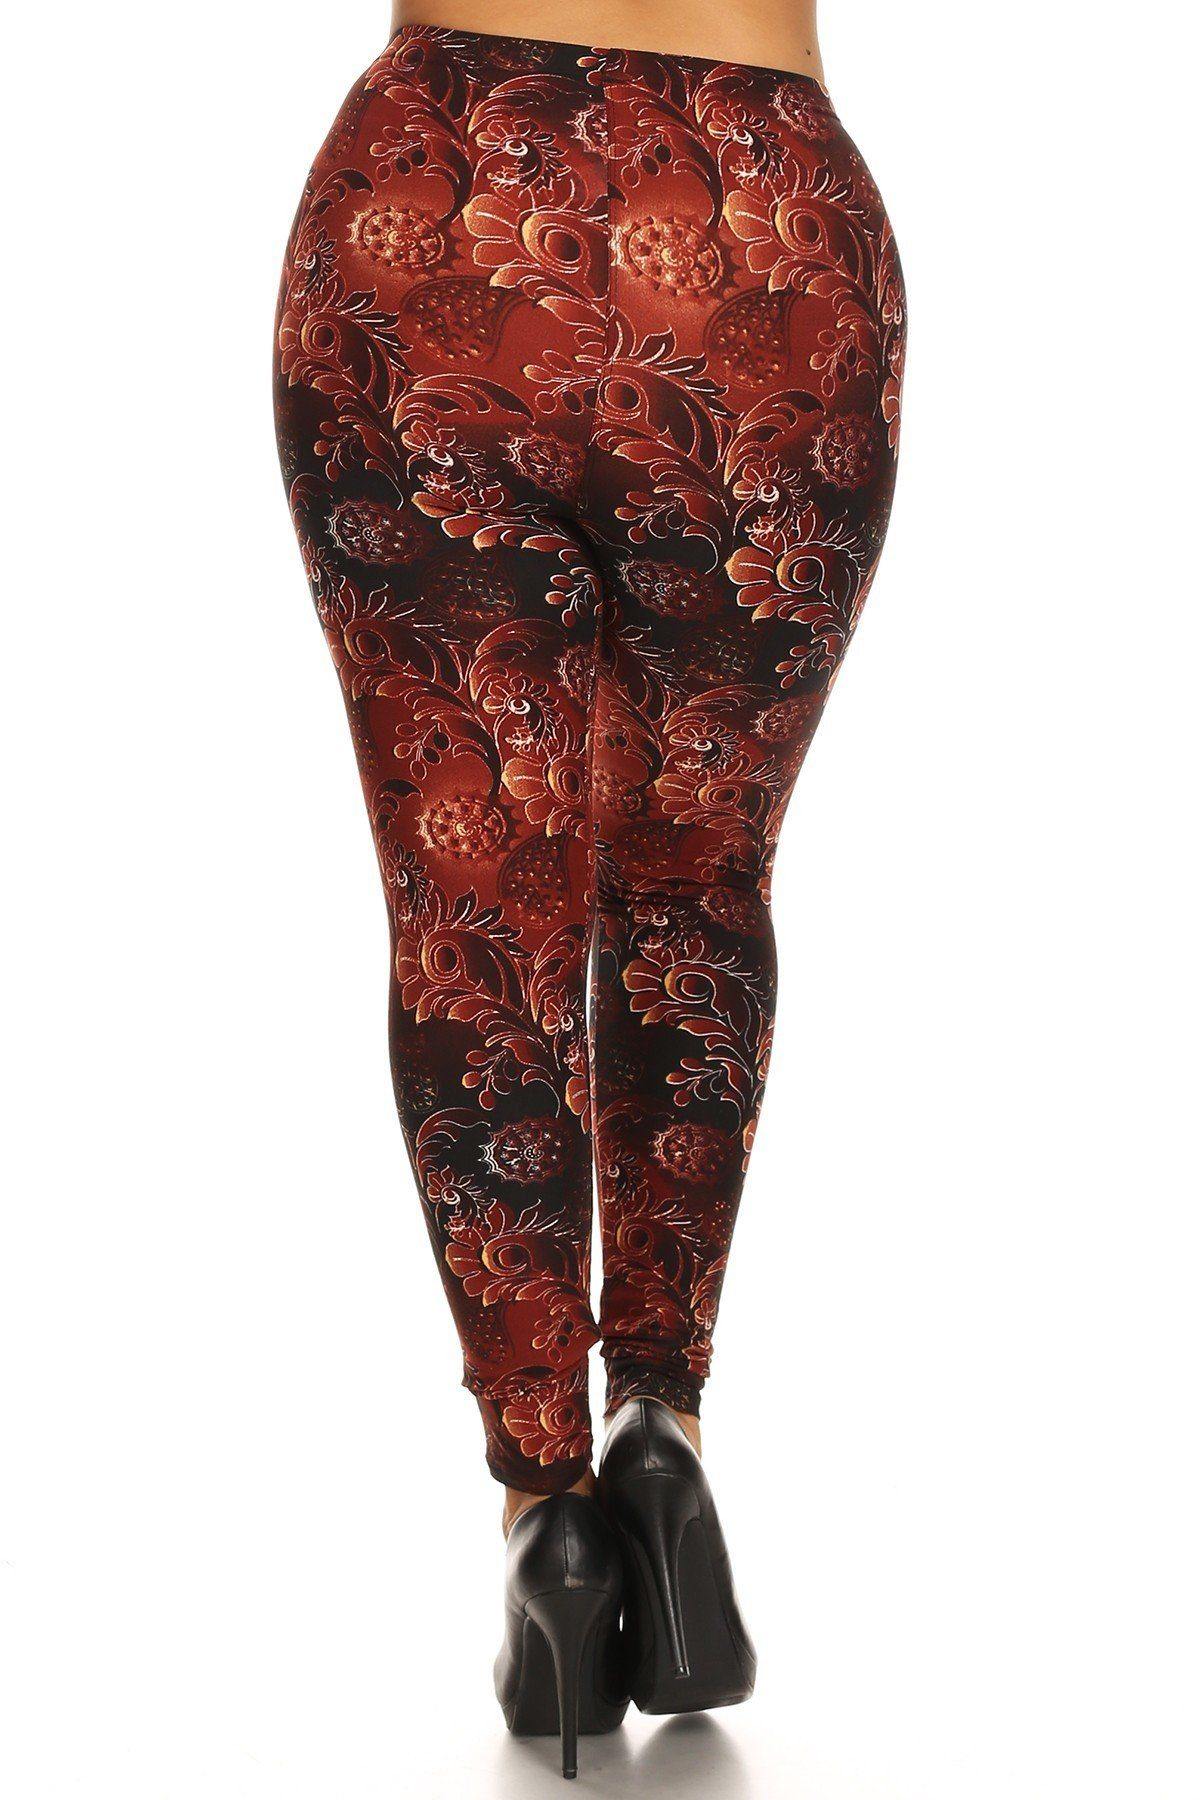 Plus Size Abstract Print, Full Length Leggings In A Slim Fitting Style With A Banded High Waist. - Pearlara